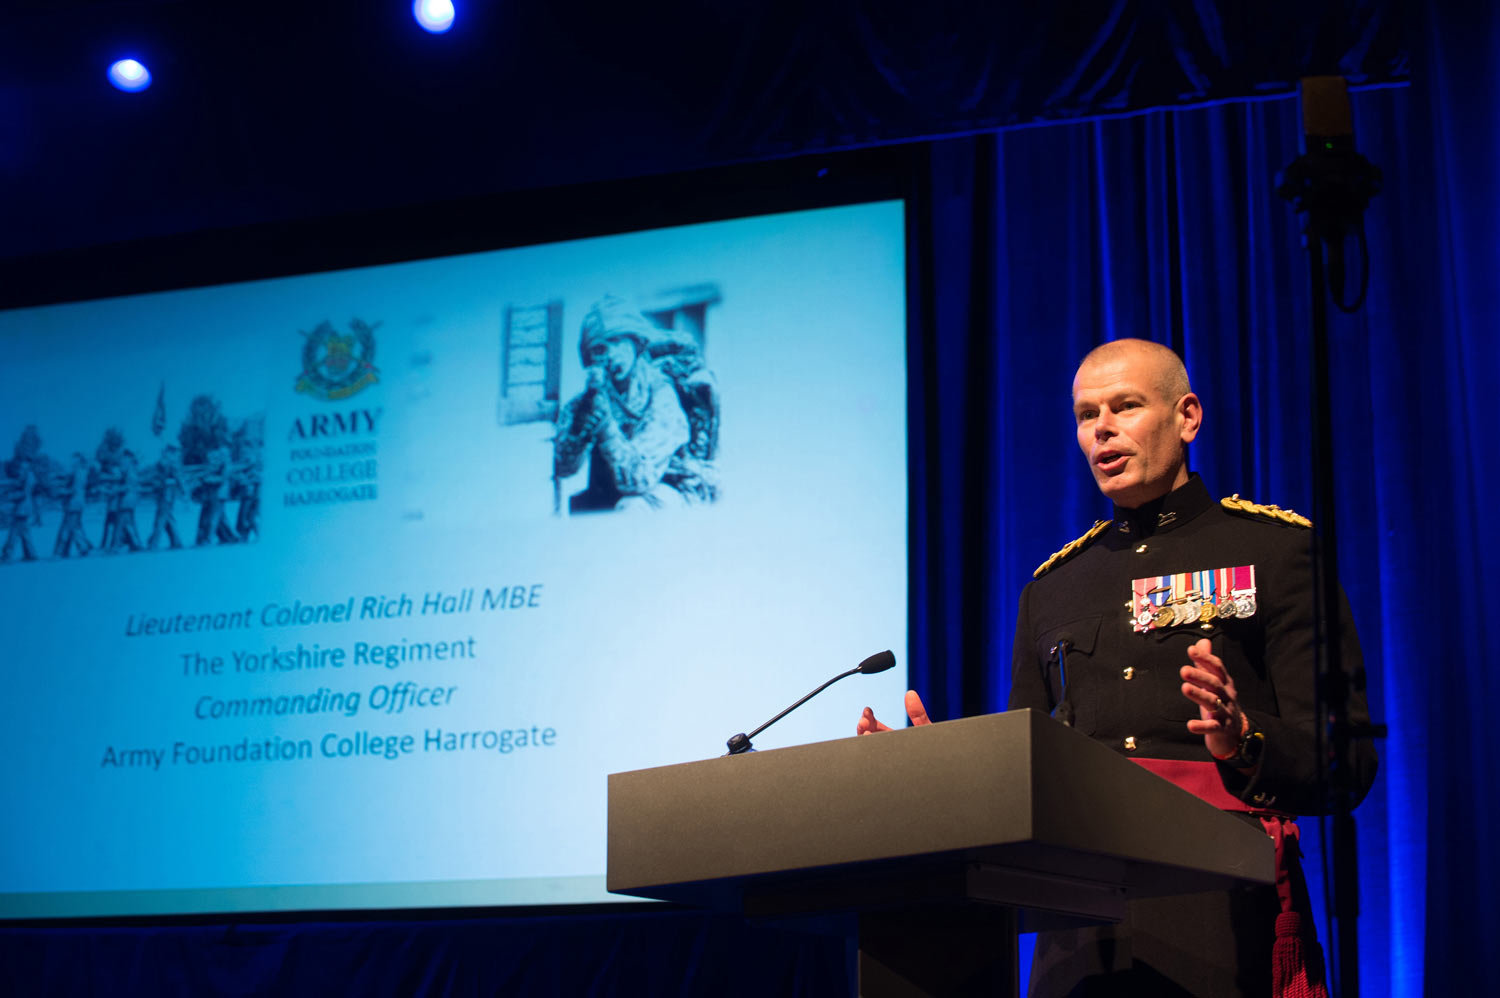 On the night, Lieutenant Colonel Richard Hall MBE, Commanding Officer of The Harrogate Army Foundation College